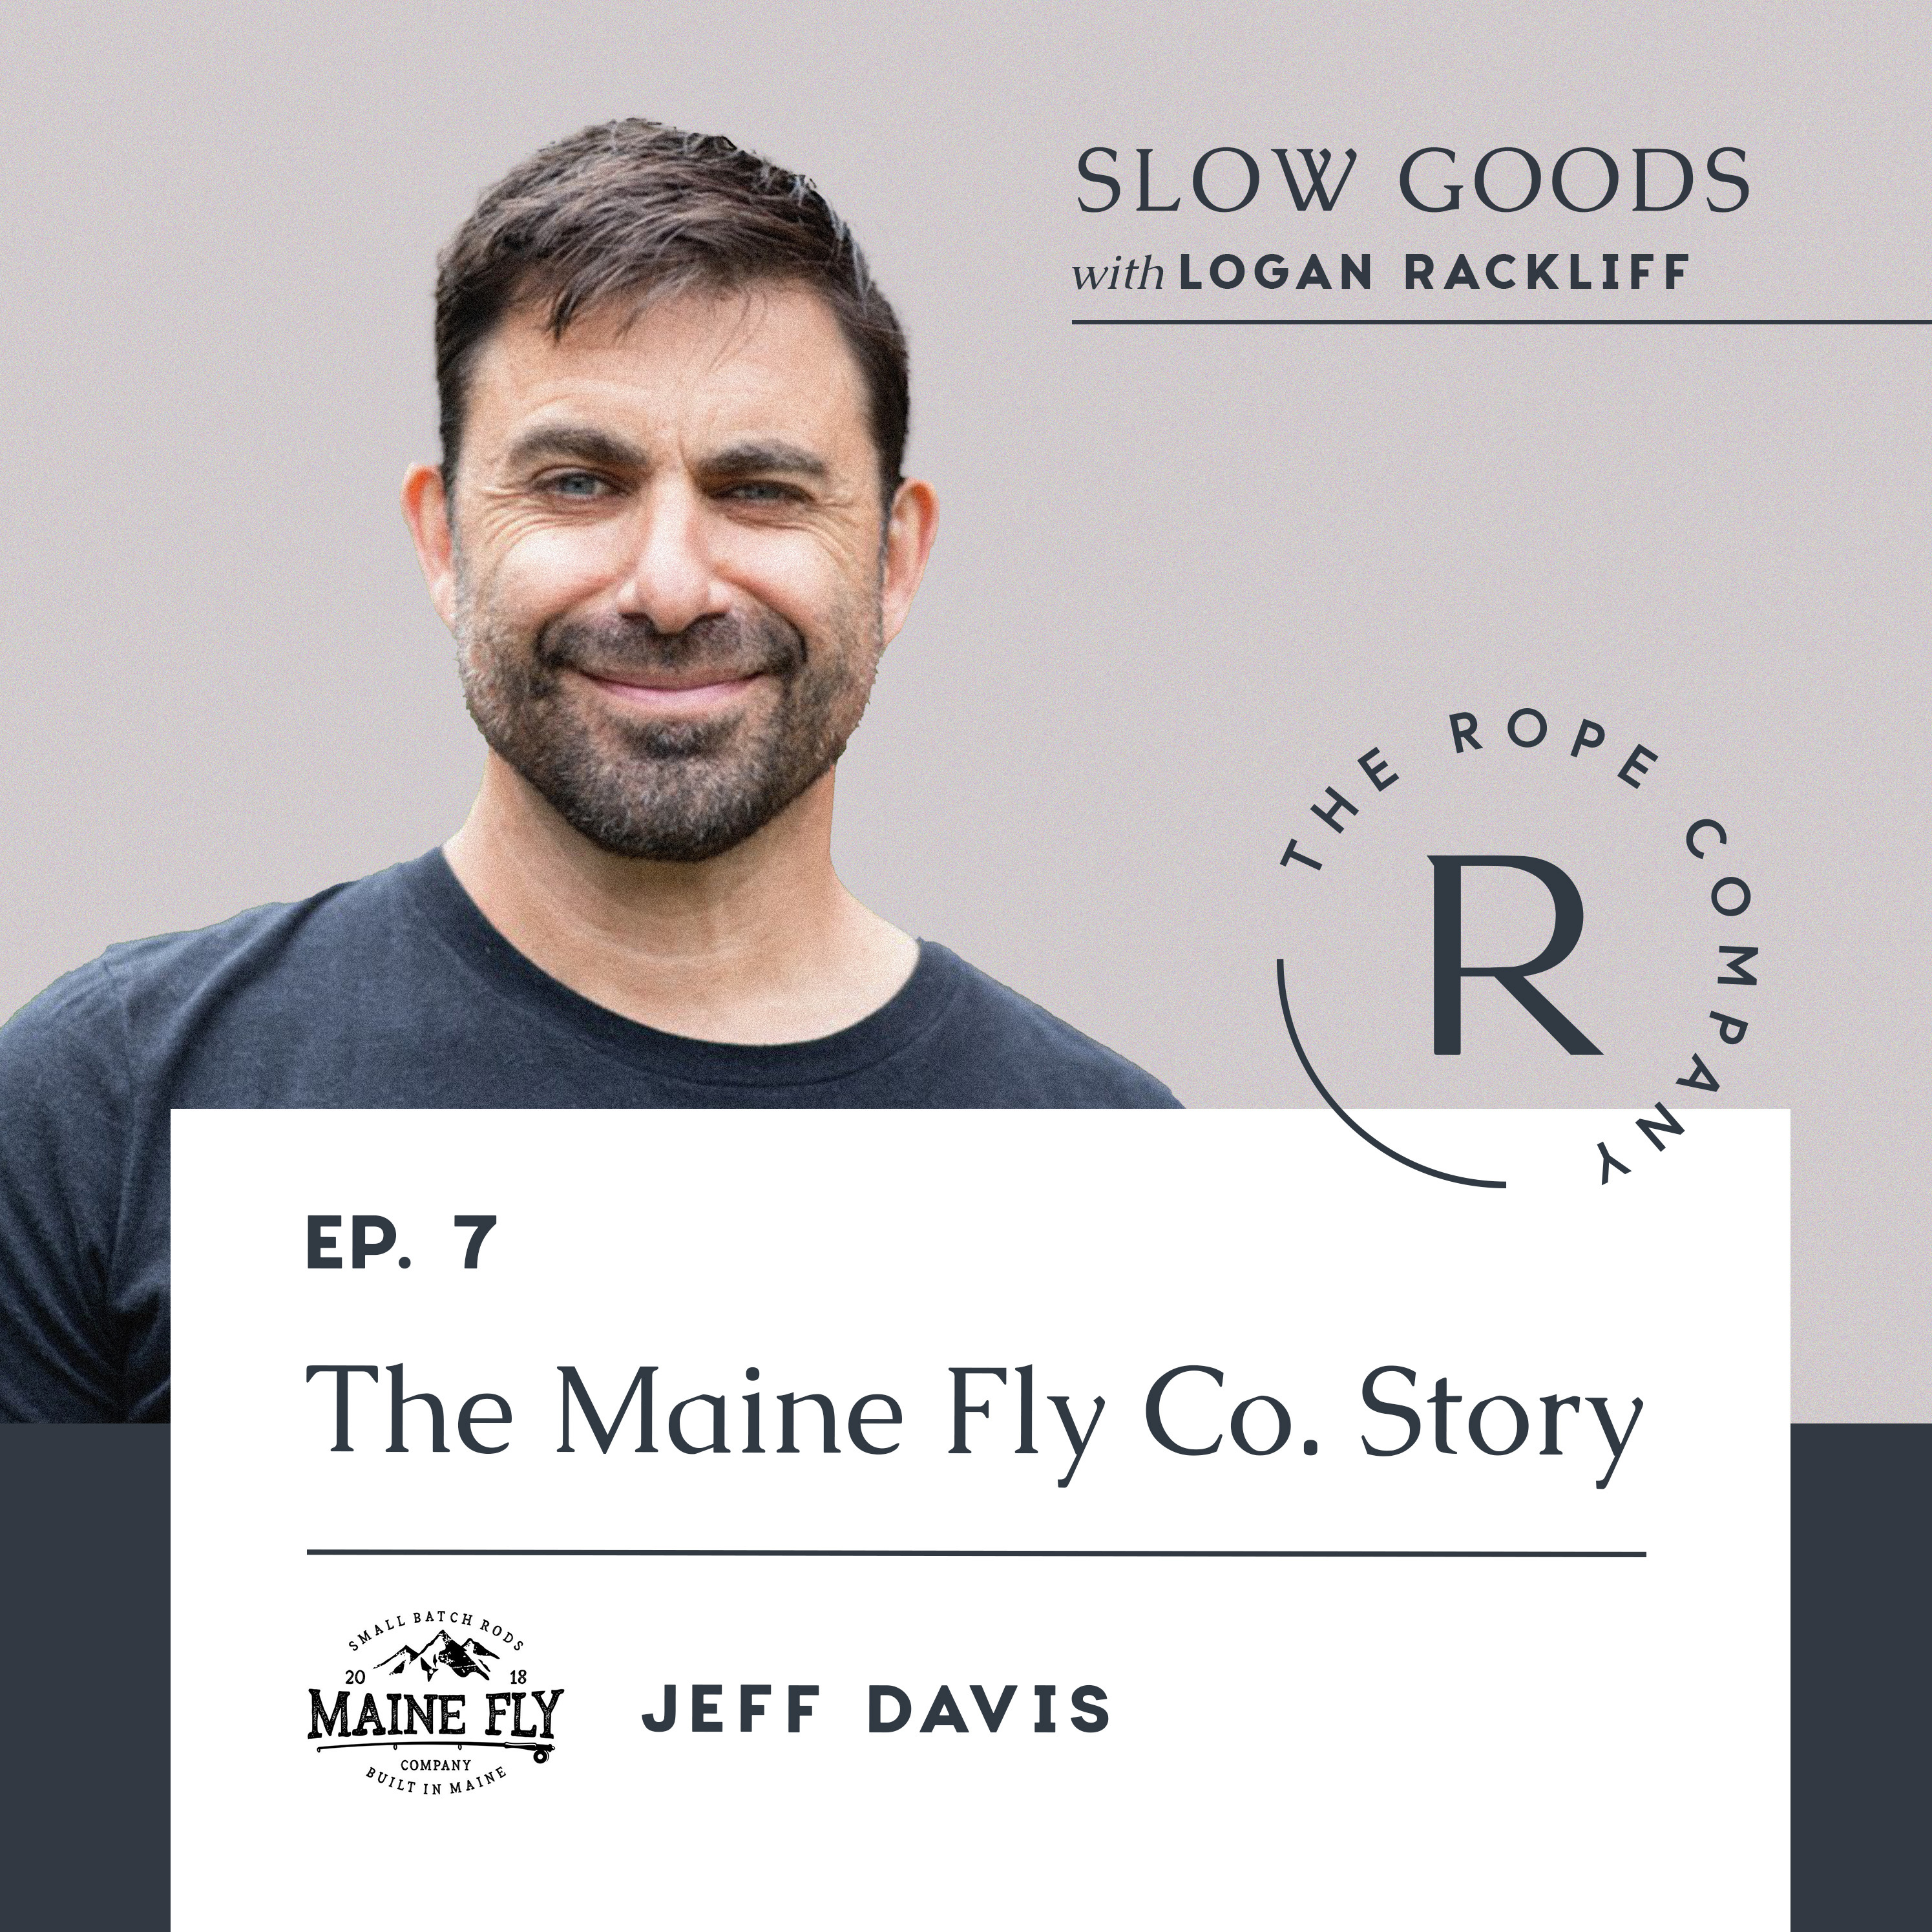 The Maine Fly Co. Story | The Slow Goods Podcast | Episode 7